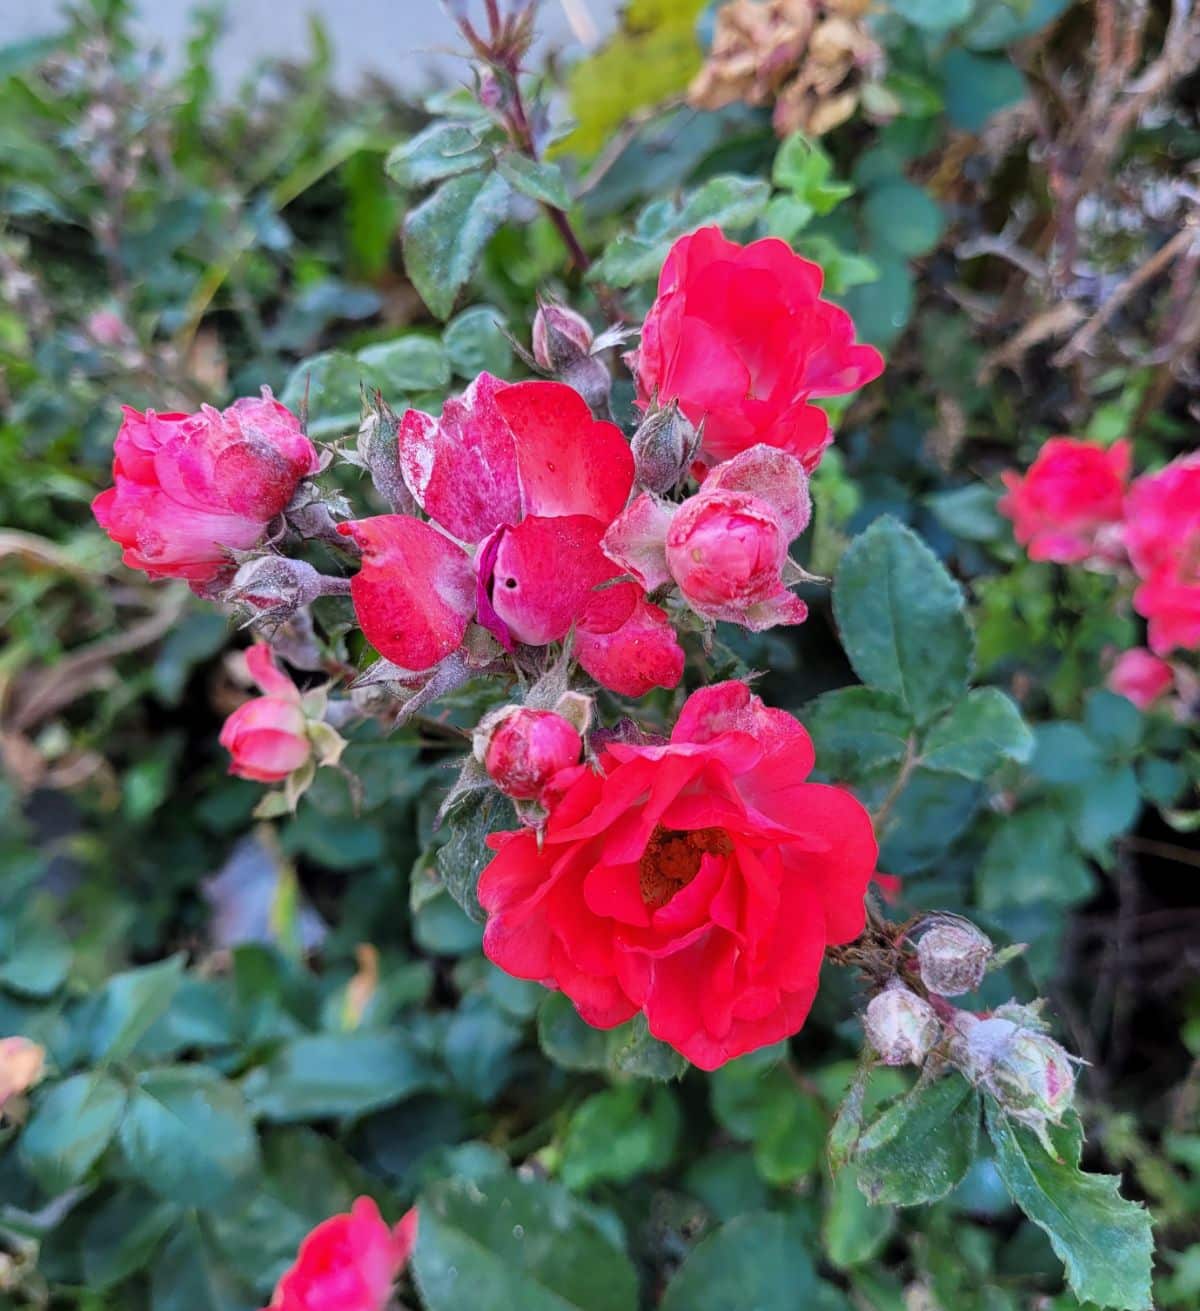 Coral Drift rose with powdery mildew